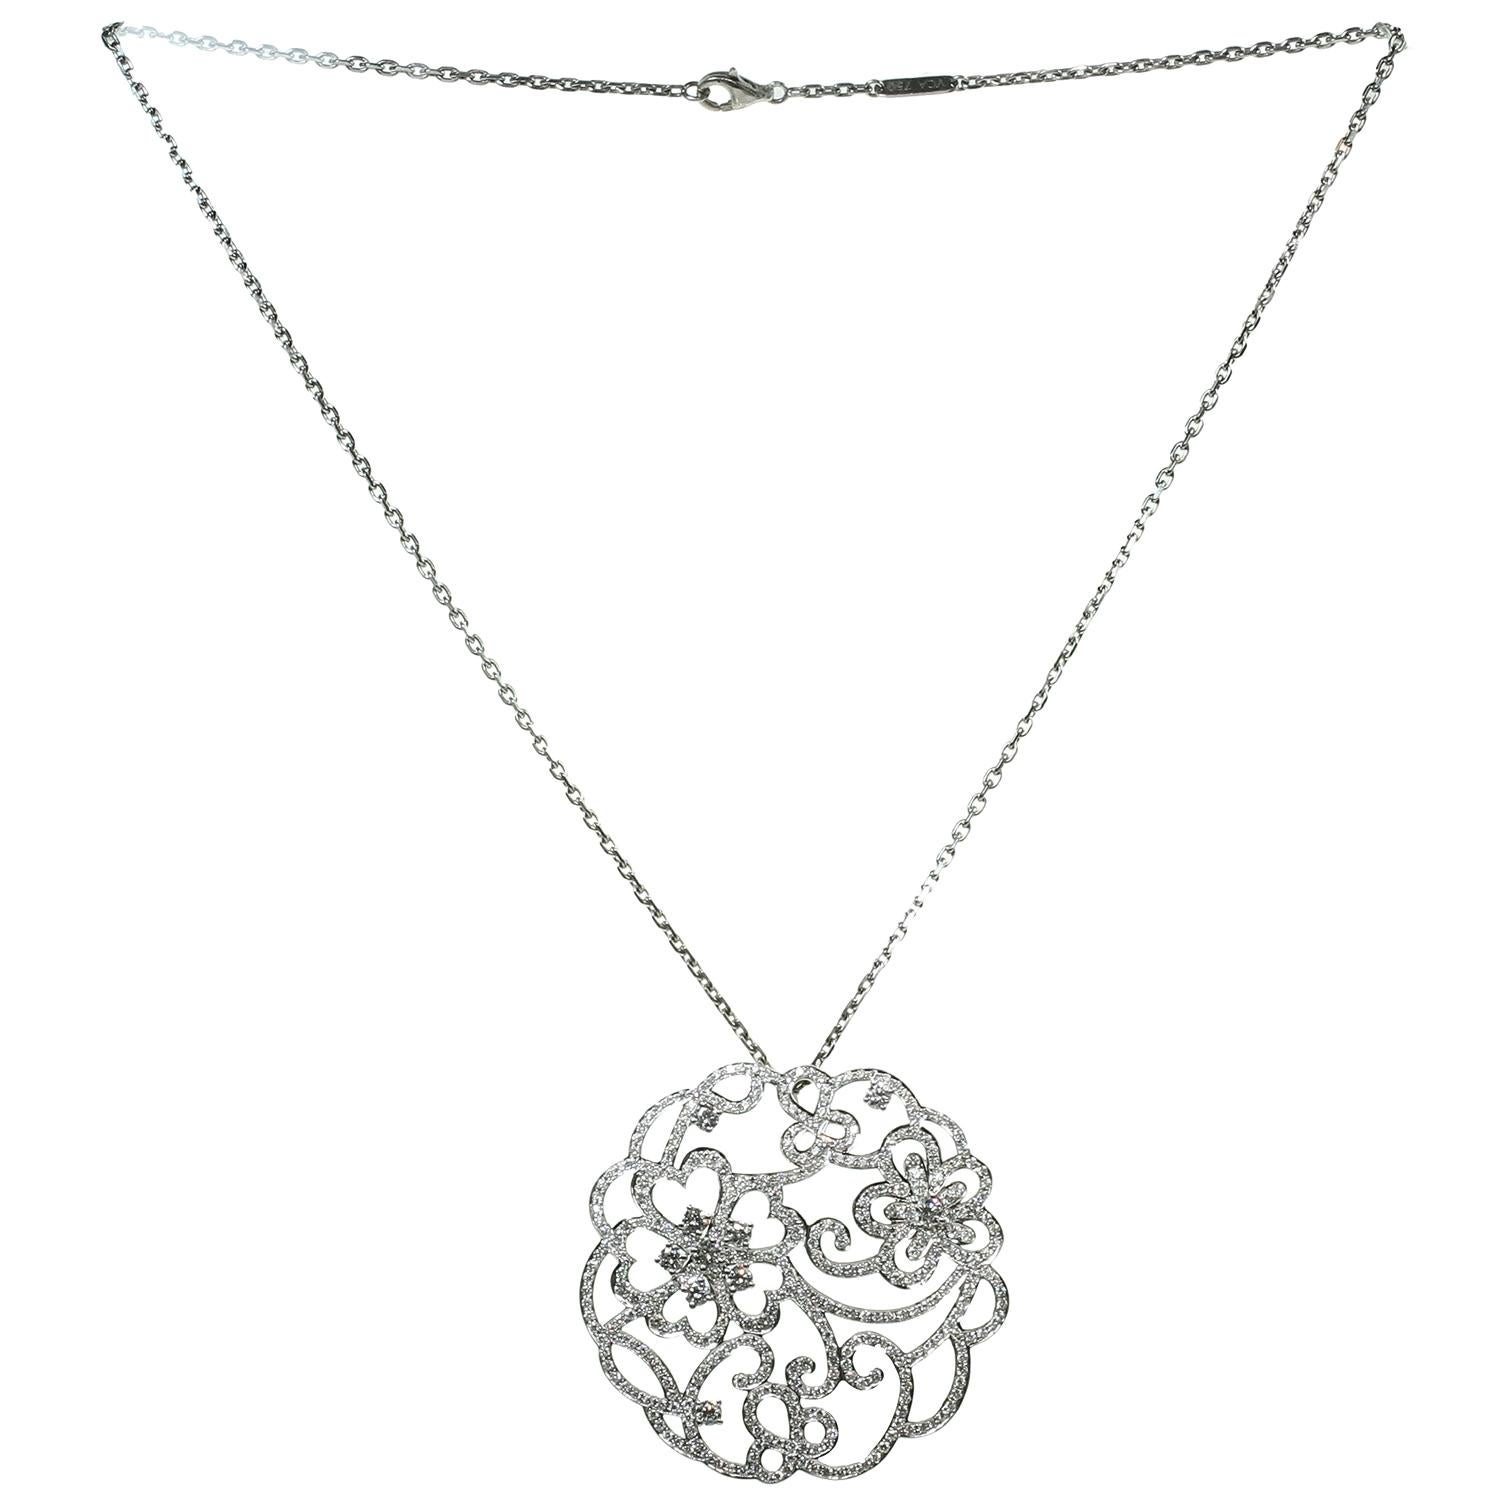 This exquisite Van Cleef & Arpels Dentelle collection necklace is crafted in 18k white gold and features a round open-work pendant set with brilliant-cut round D-F VVS1-VVS2 diamonds. Made in France circa 2000s. Measurements: 2.04